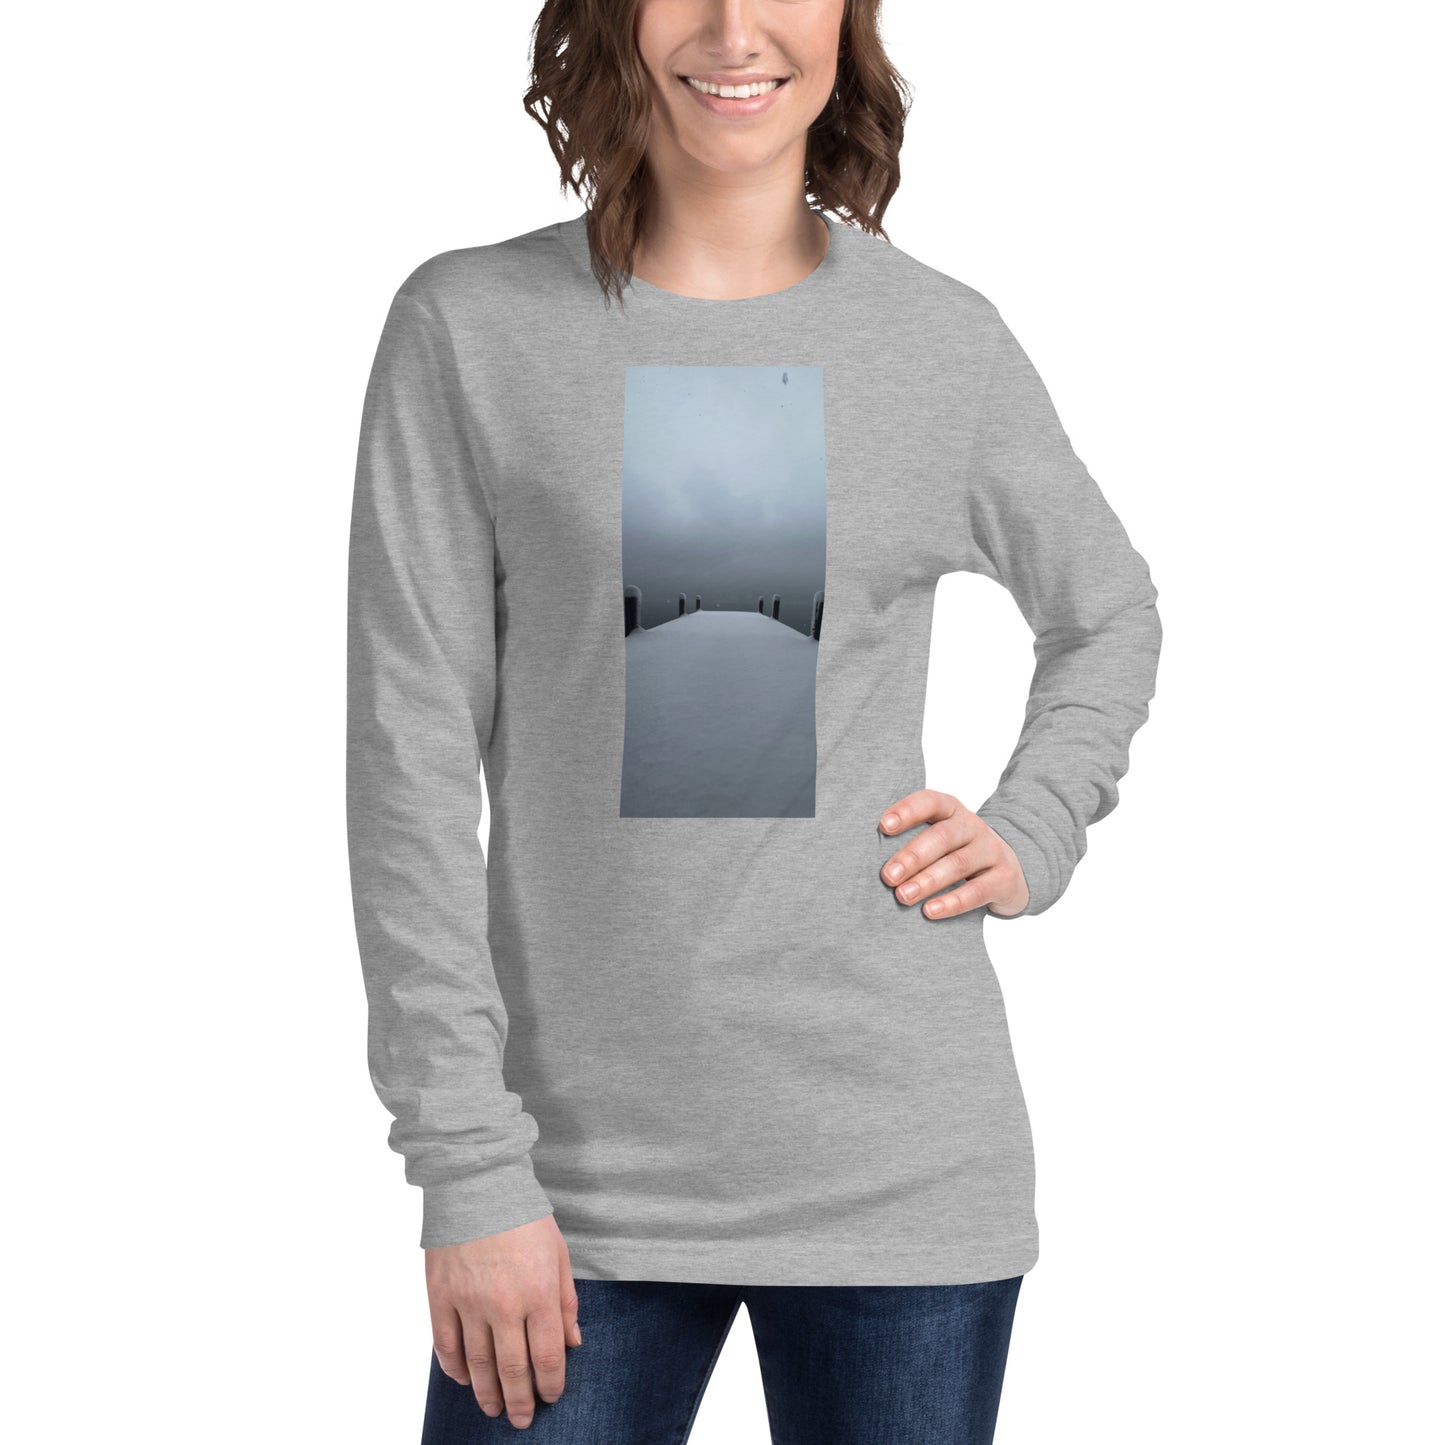 I doubt the Donner party wore clothes this rad (unisex long sleeve)